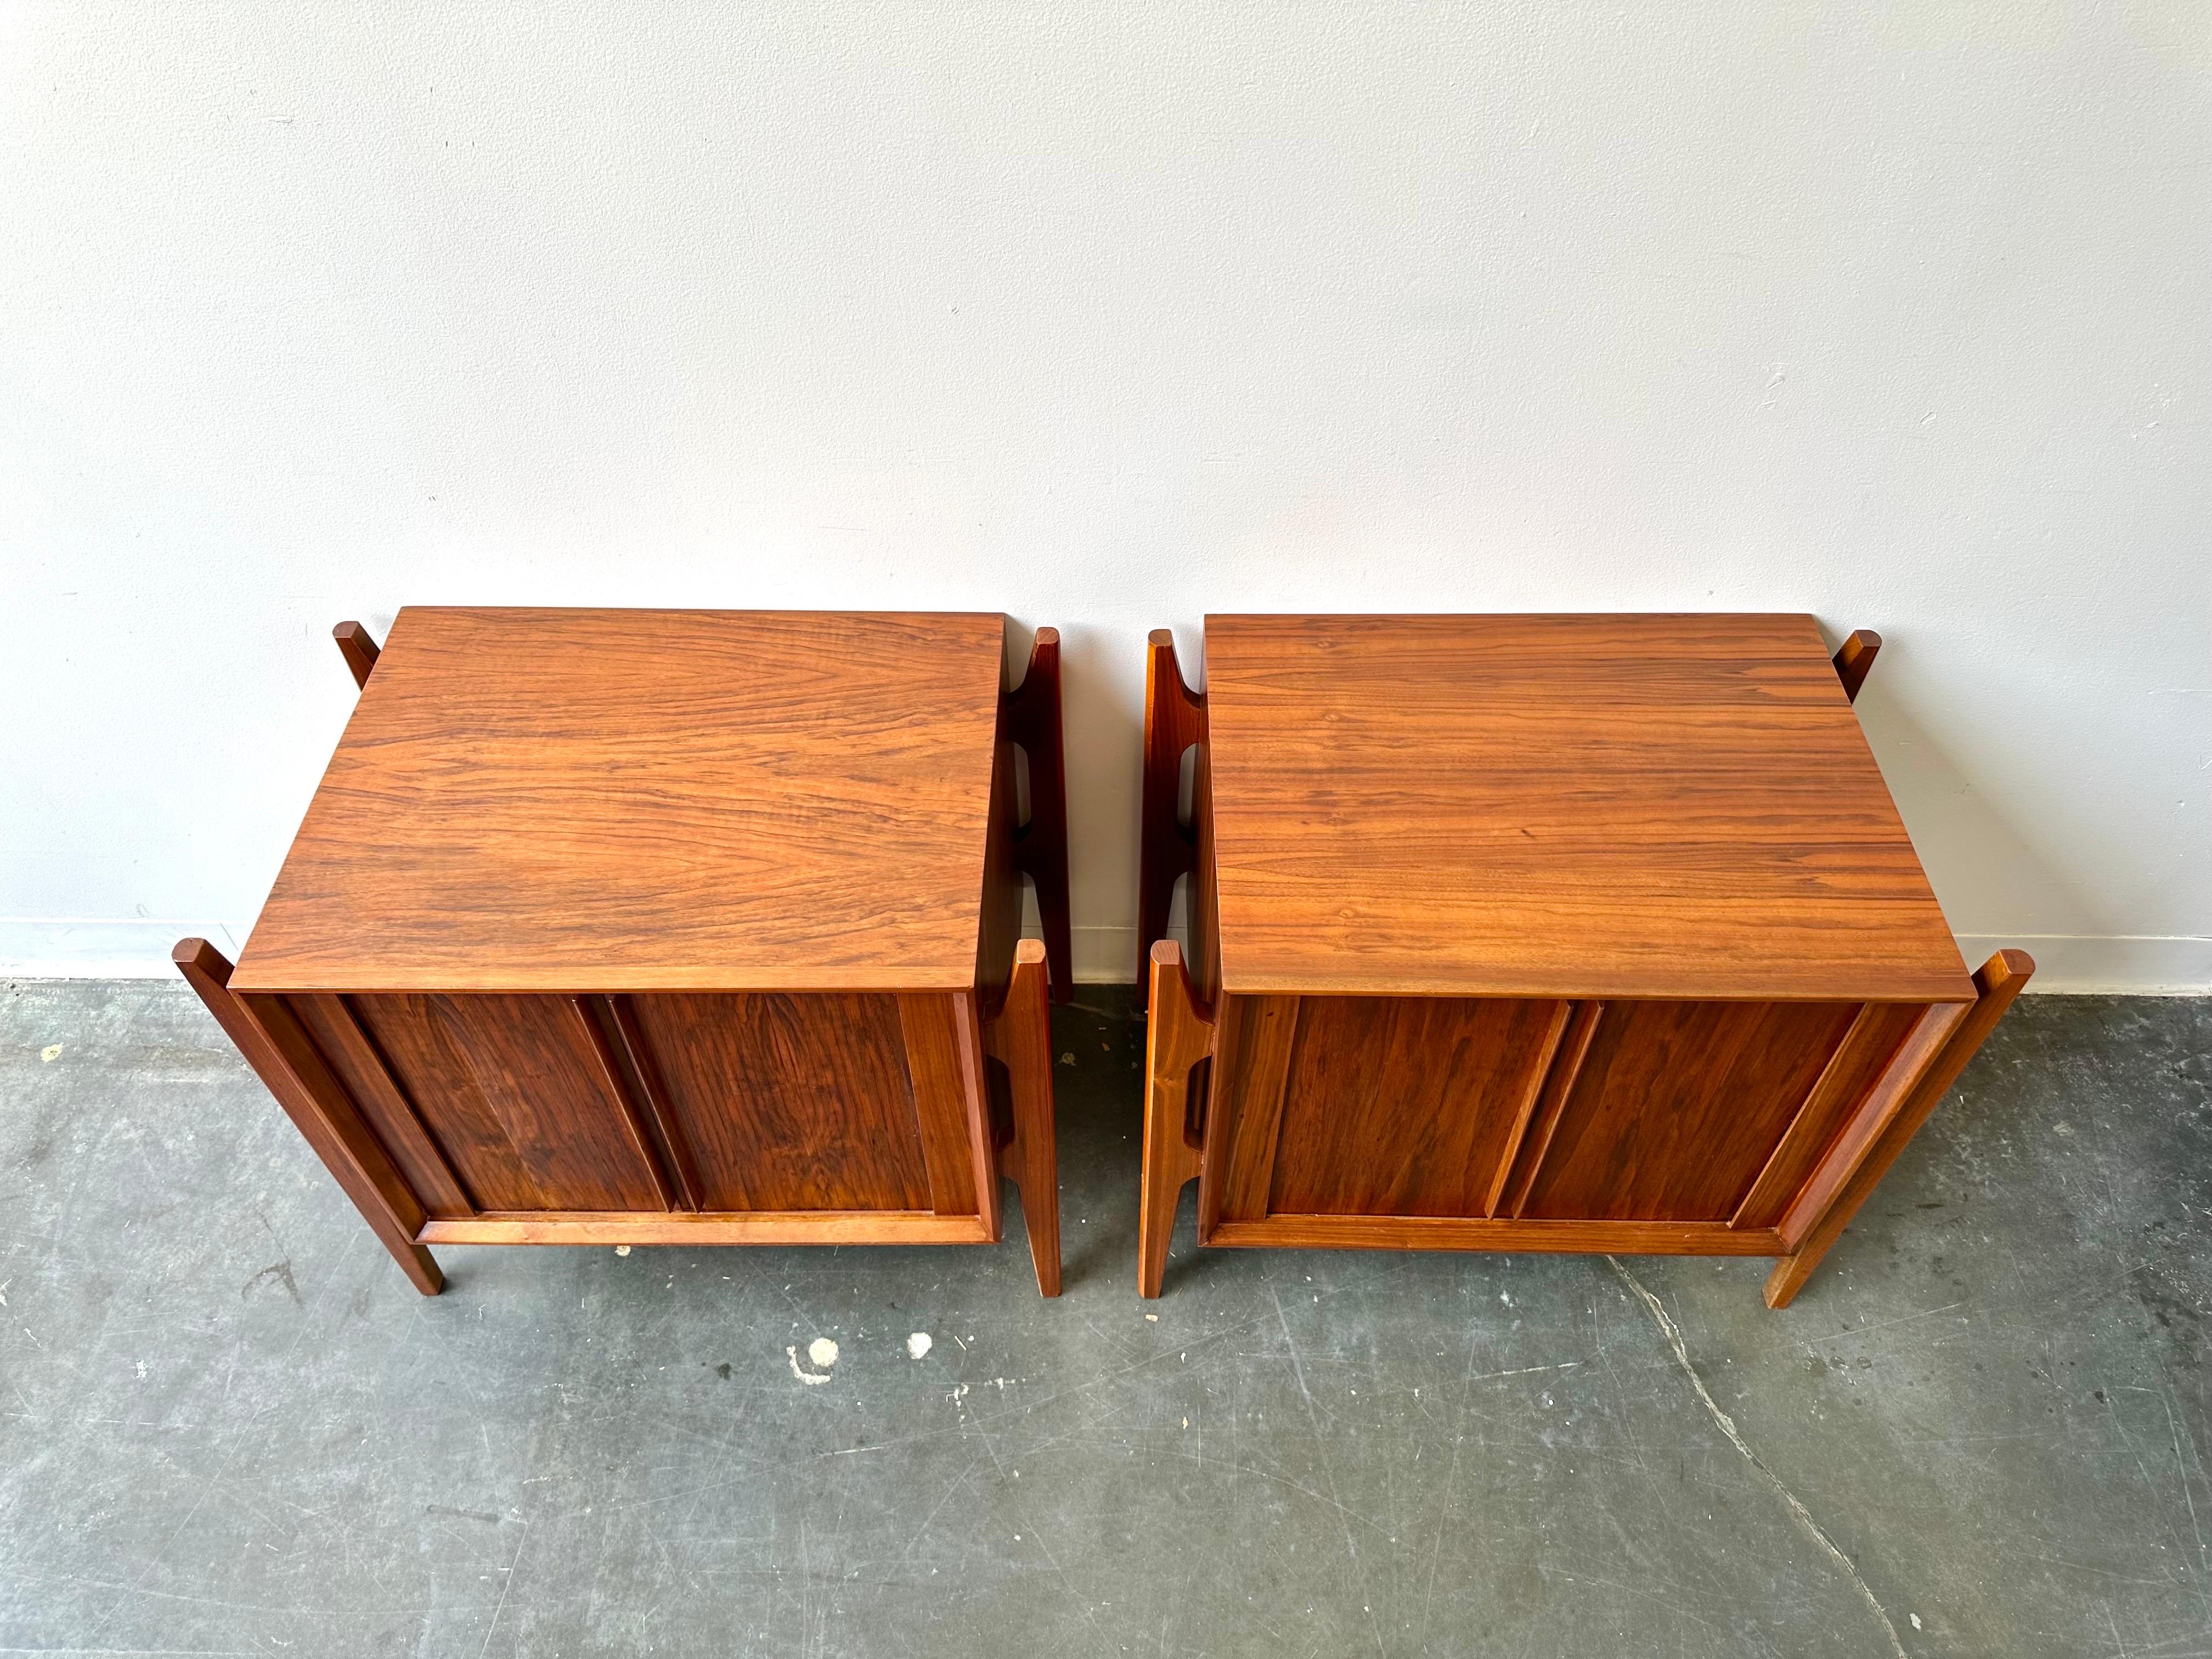 Woodwork William Hinn style exoskeleton nightstands by Jorgen Clausen - set of 2 - MCM For Sale